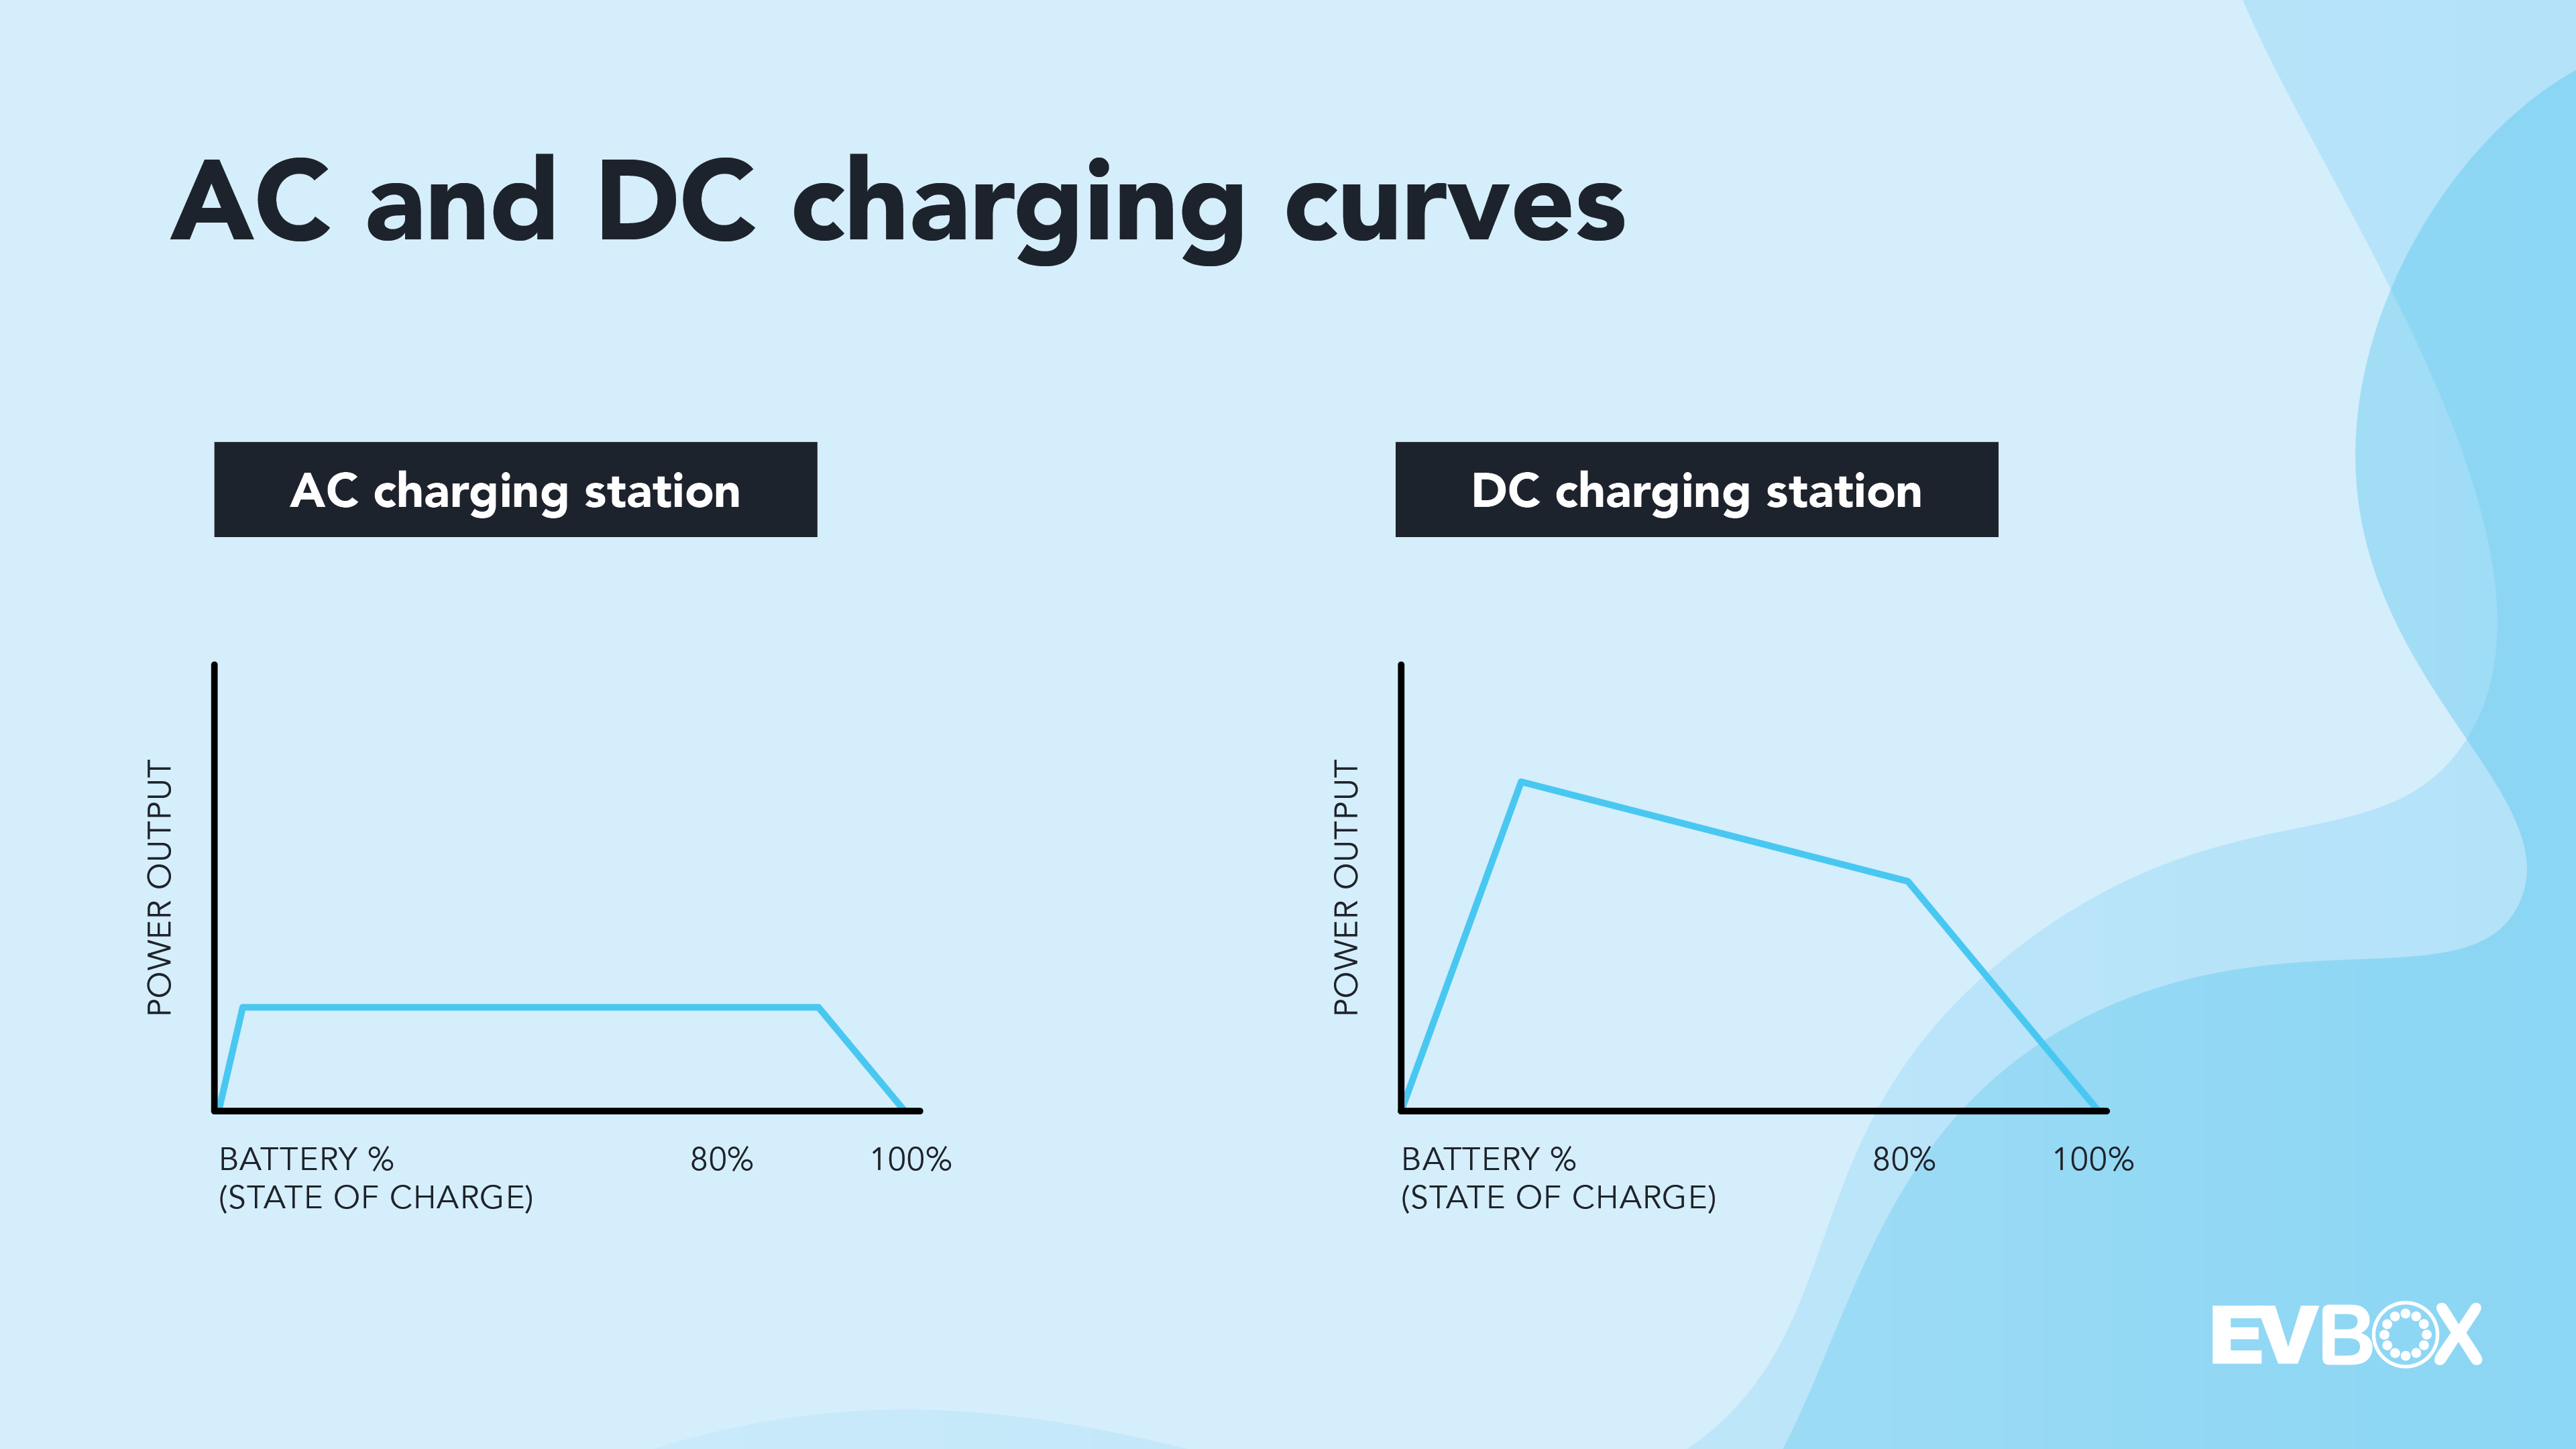 Graphs showing AC and DC charging curves.